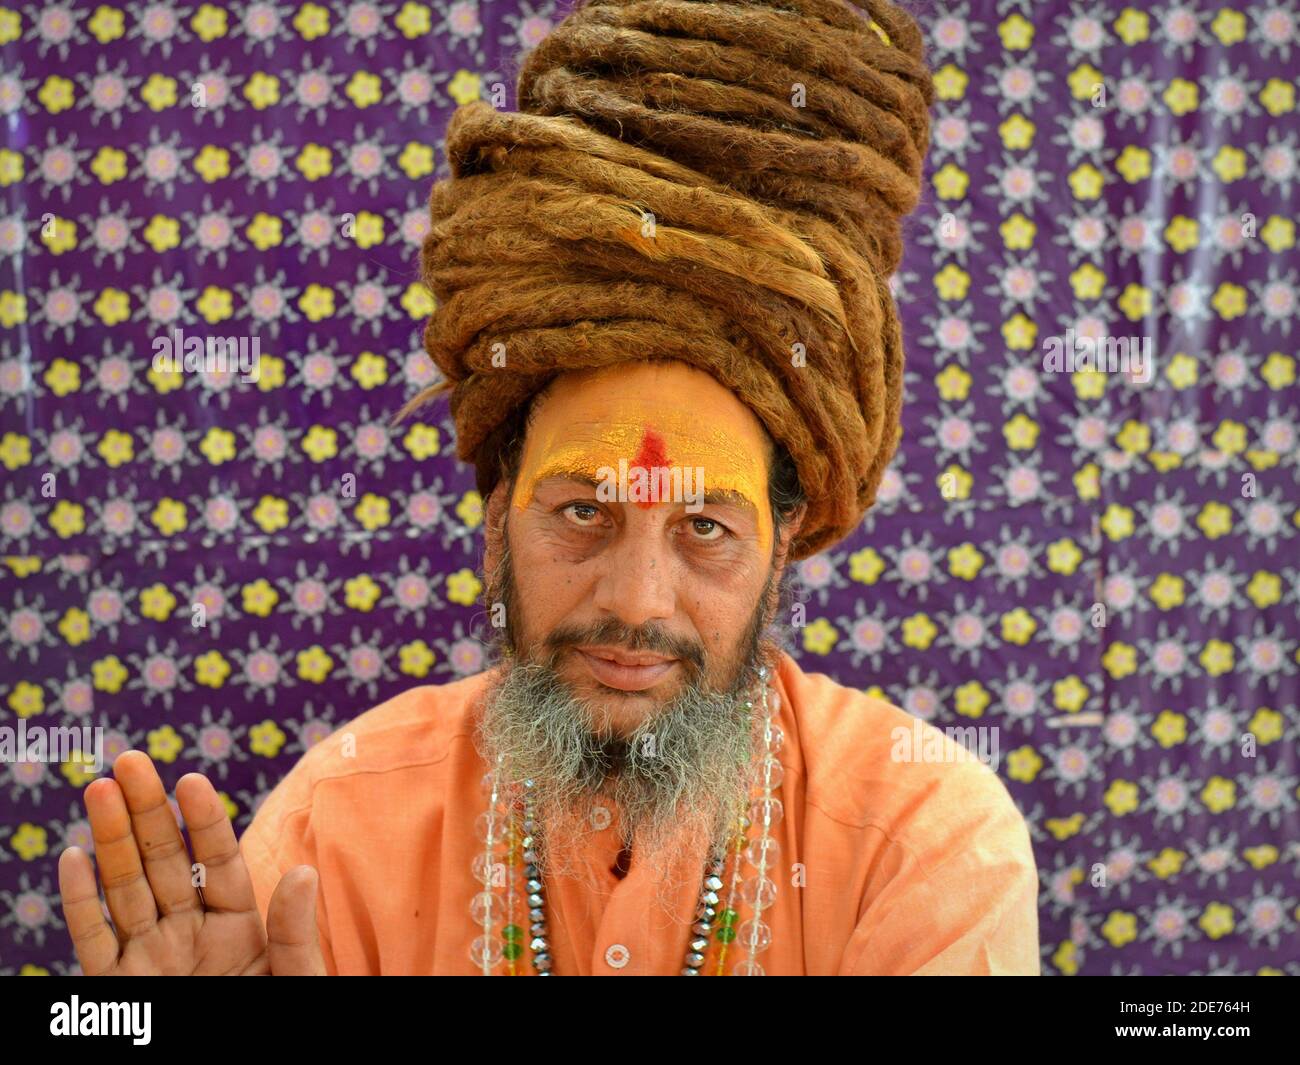 Indian Hindu holy man (sadhu, baba, guru) with big rolled-up dreadlocks and yellow forehead poses for the camera during the Shivratri Mela festival. Stock Photo